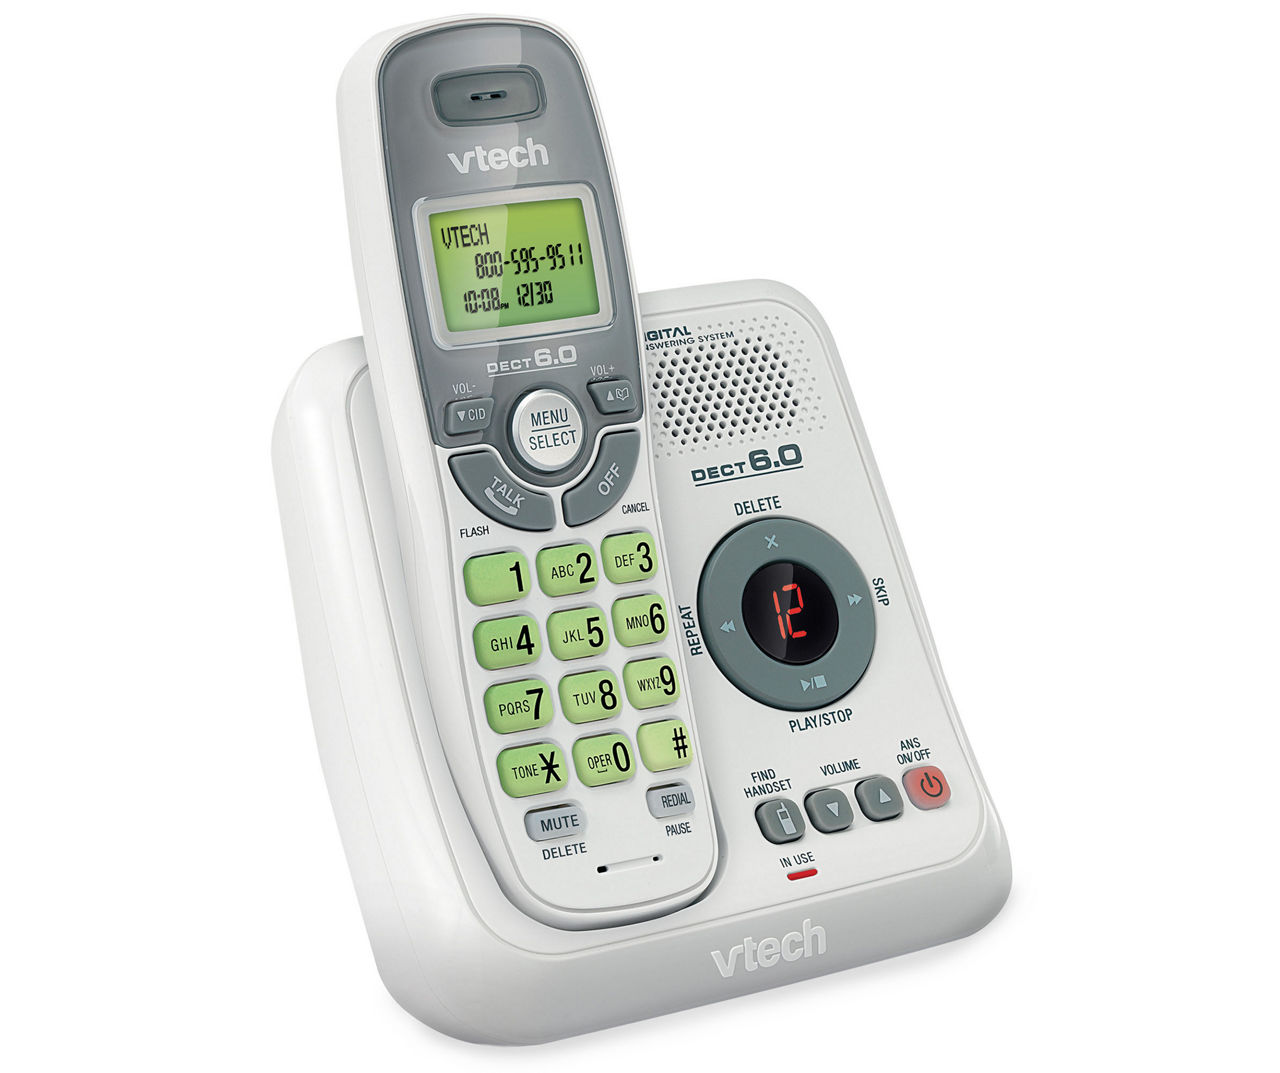 Vtech White Cordless Phone with Caller ID & Answering Machine